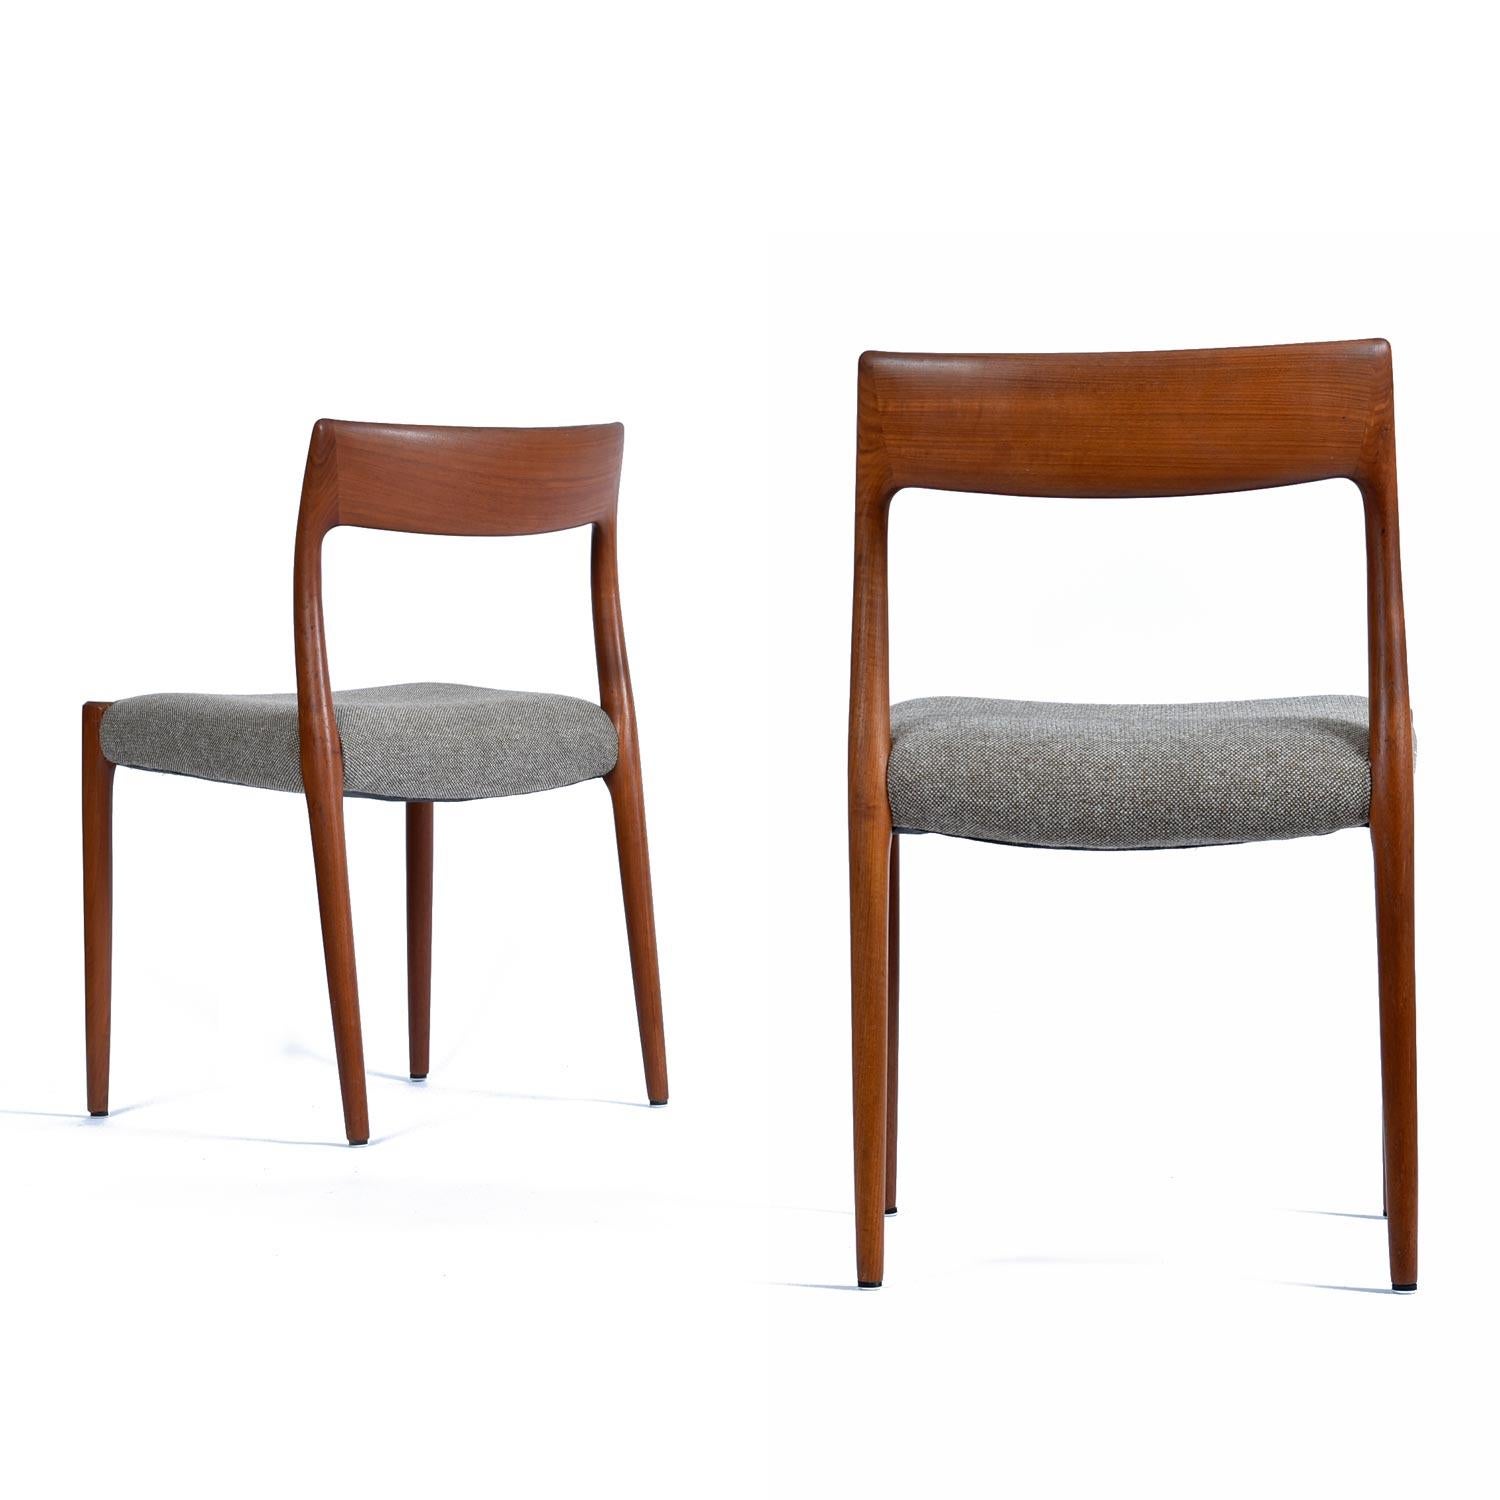 Mid-20th Century Six Danish Teak Dining Chairs Model 75 by Niels Otto Møller